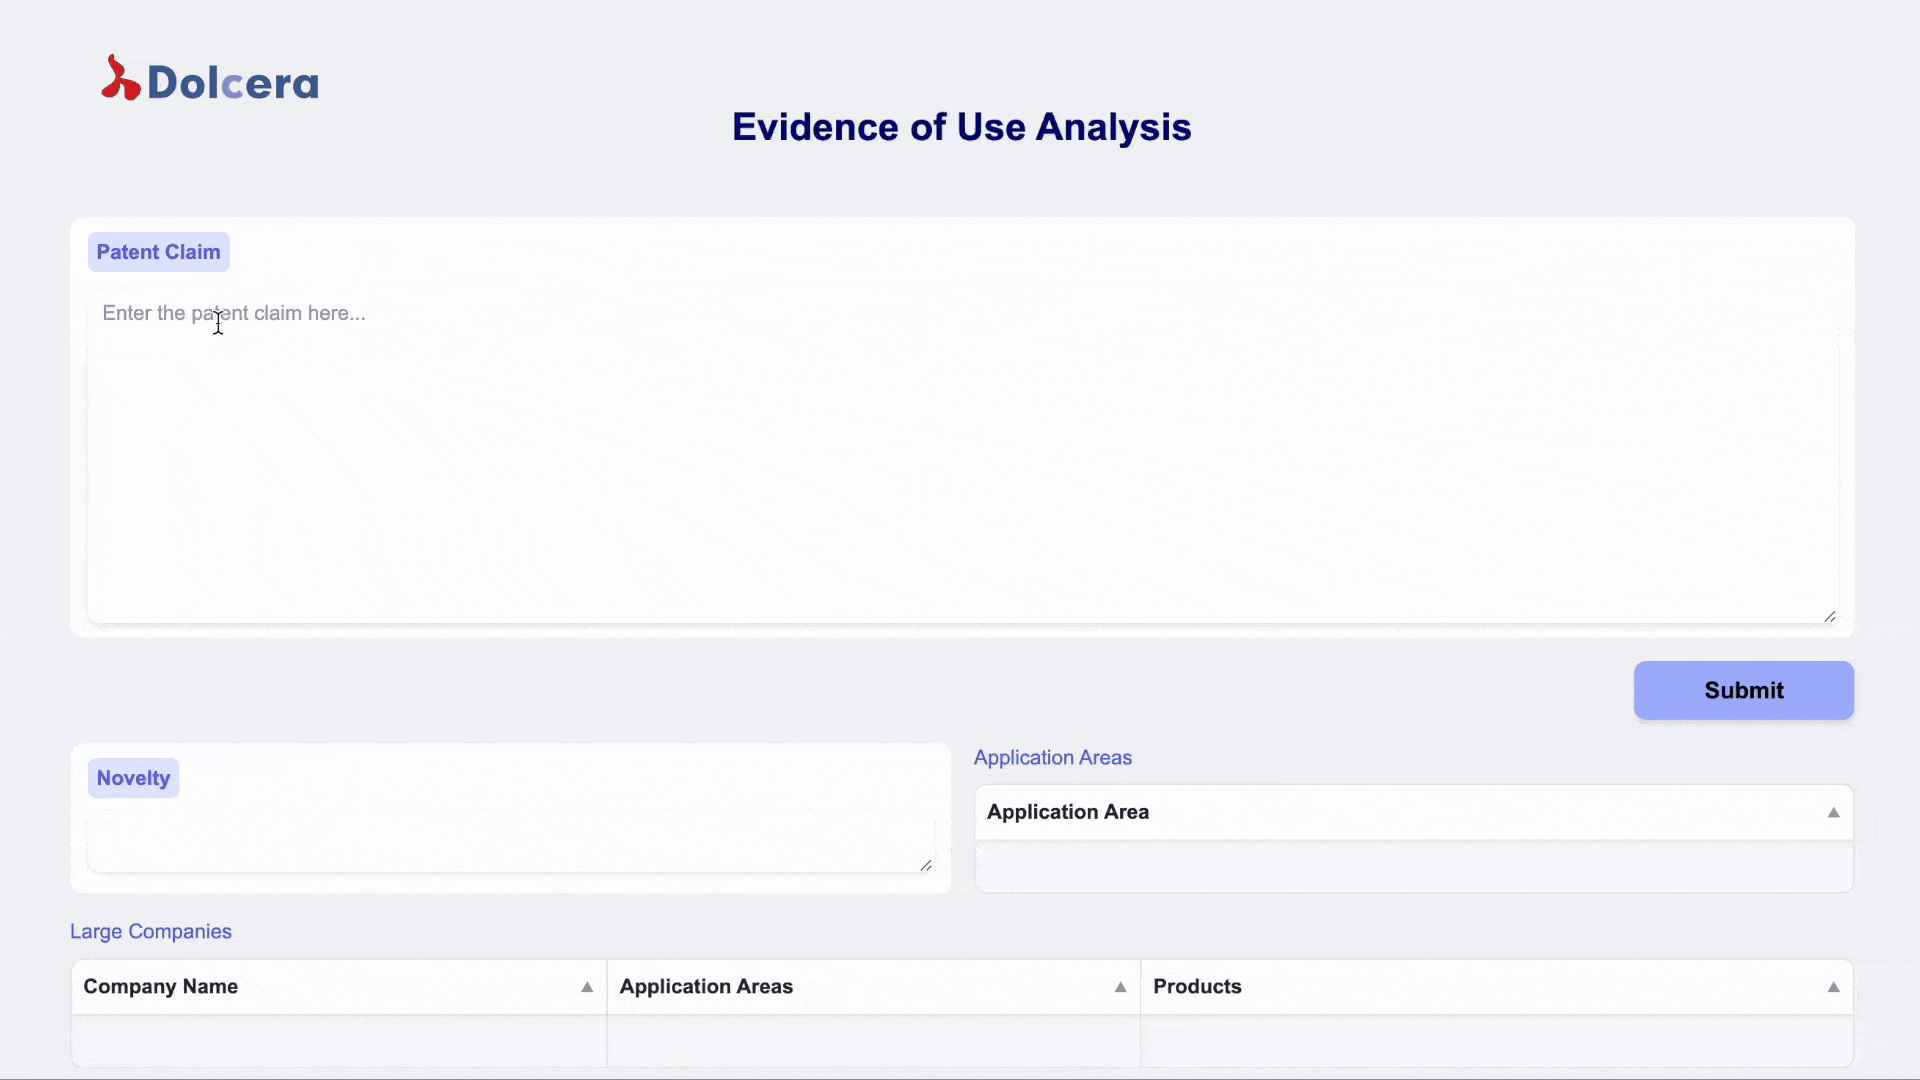 The Evidence of Use